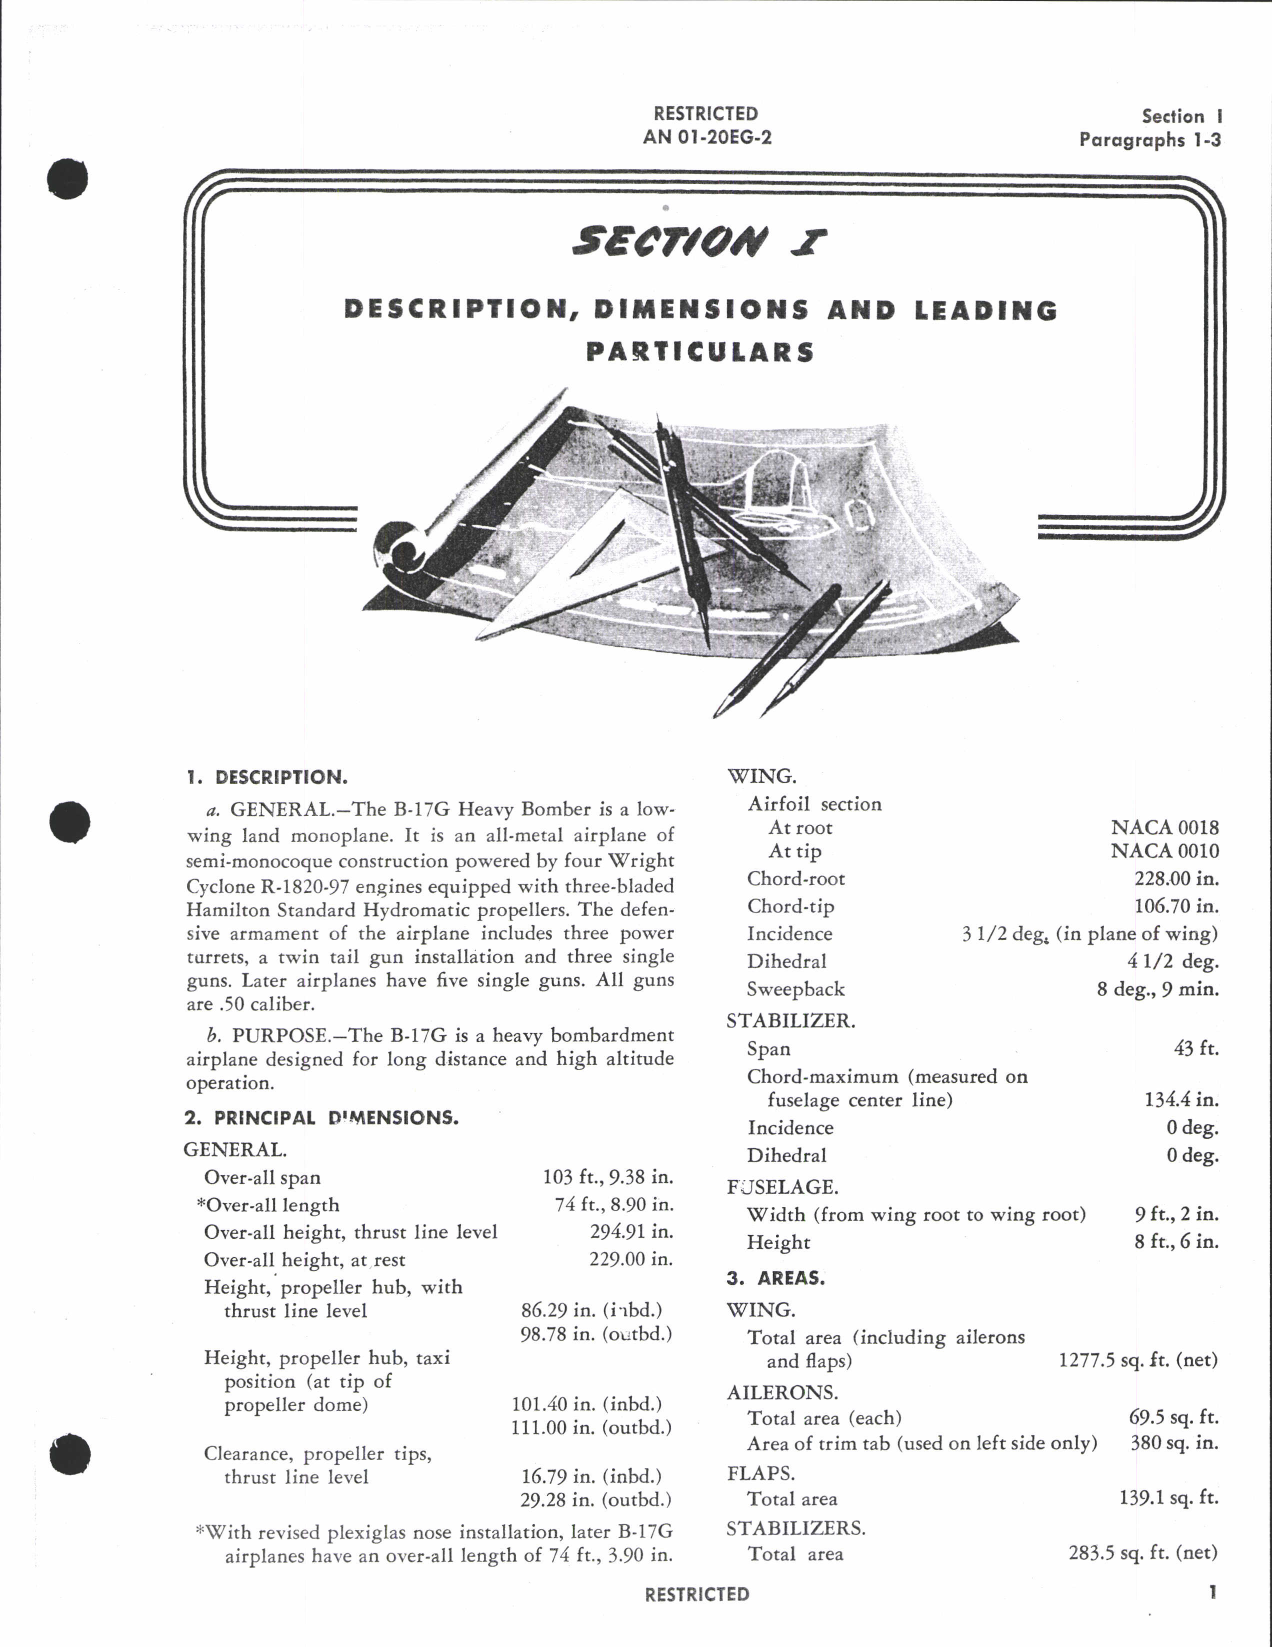 Sample page 7 from AirCorps Library document: Maintenance Instructions for B-17G Aircraft